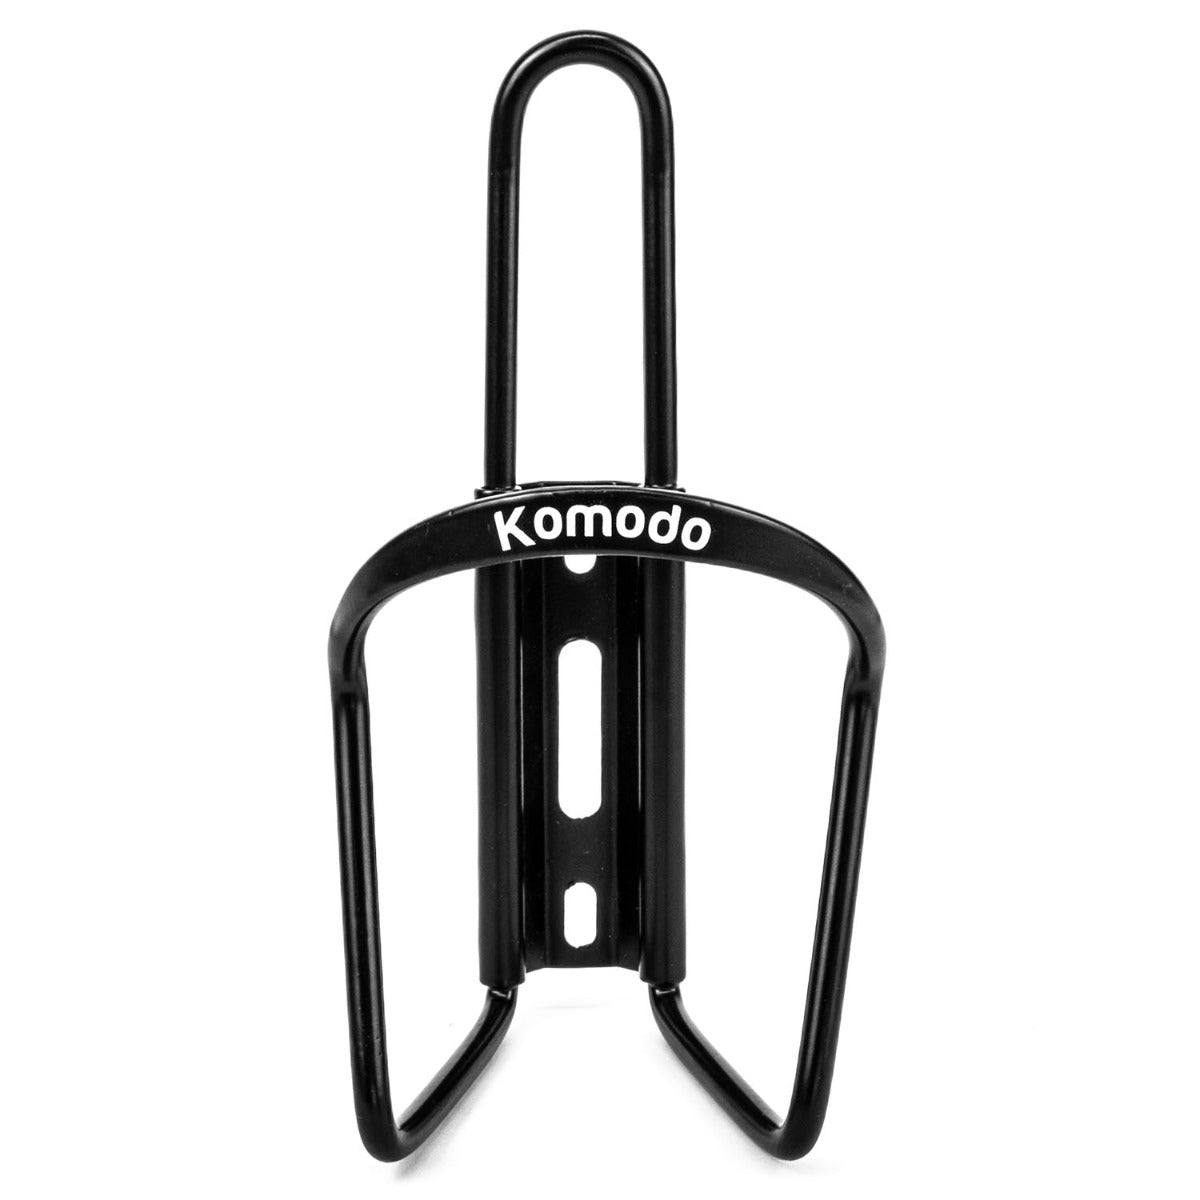 Set of 2 Bicycle Bottle Cages - Black - Inspirely